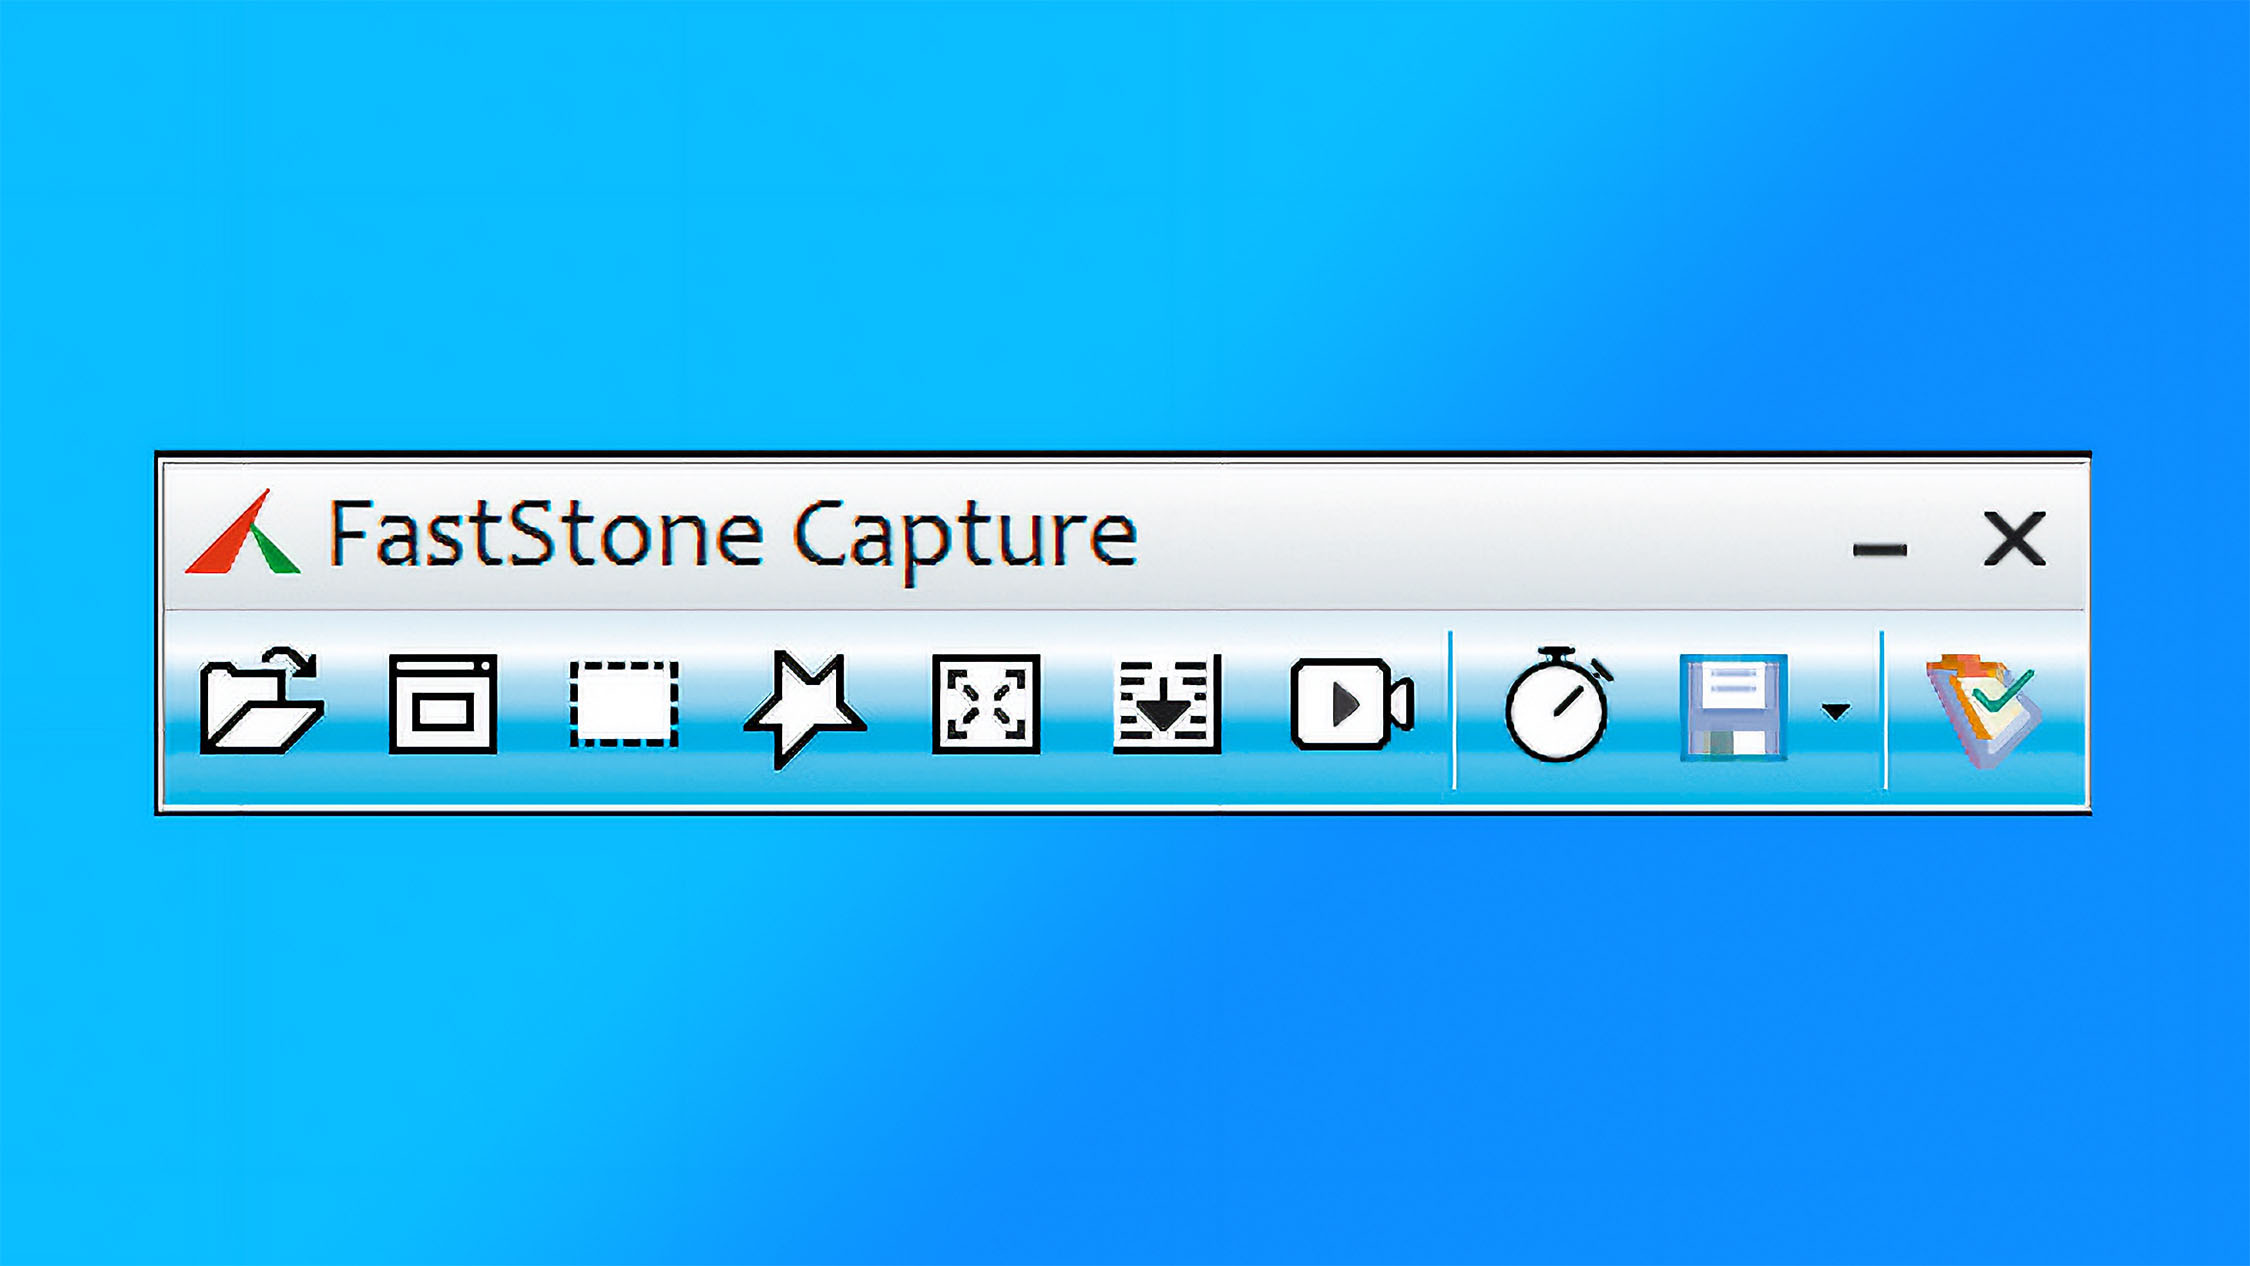 FastStone Capture review: A powerful screenshot and video capture tool